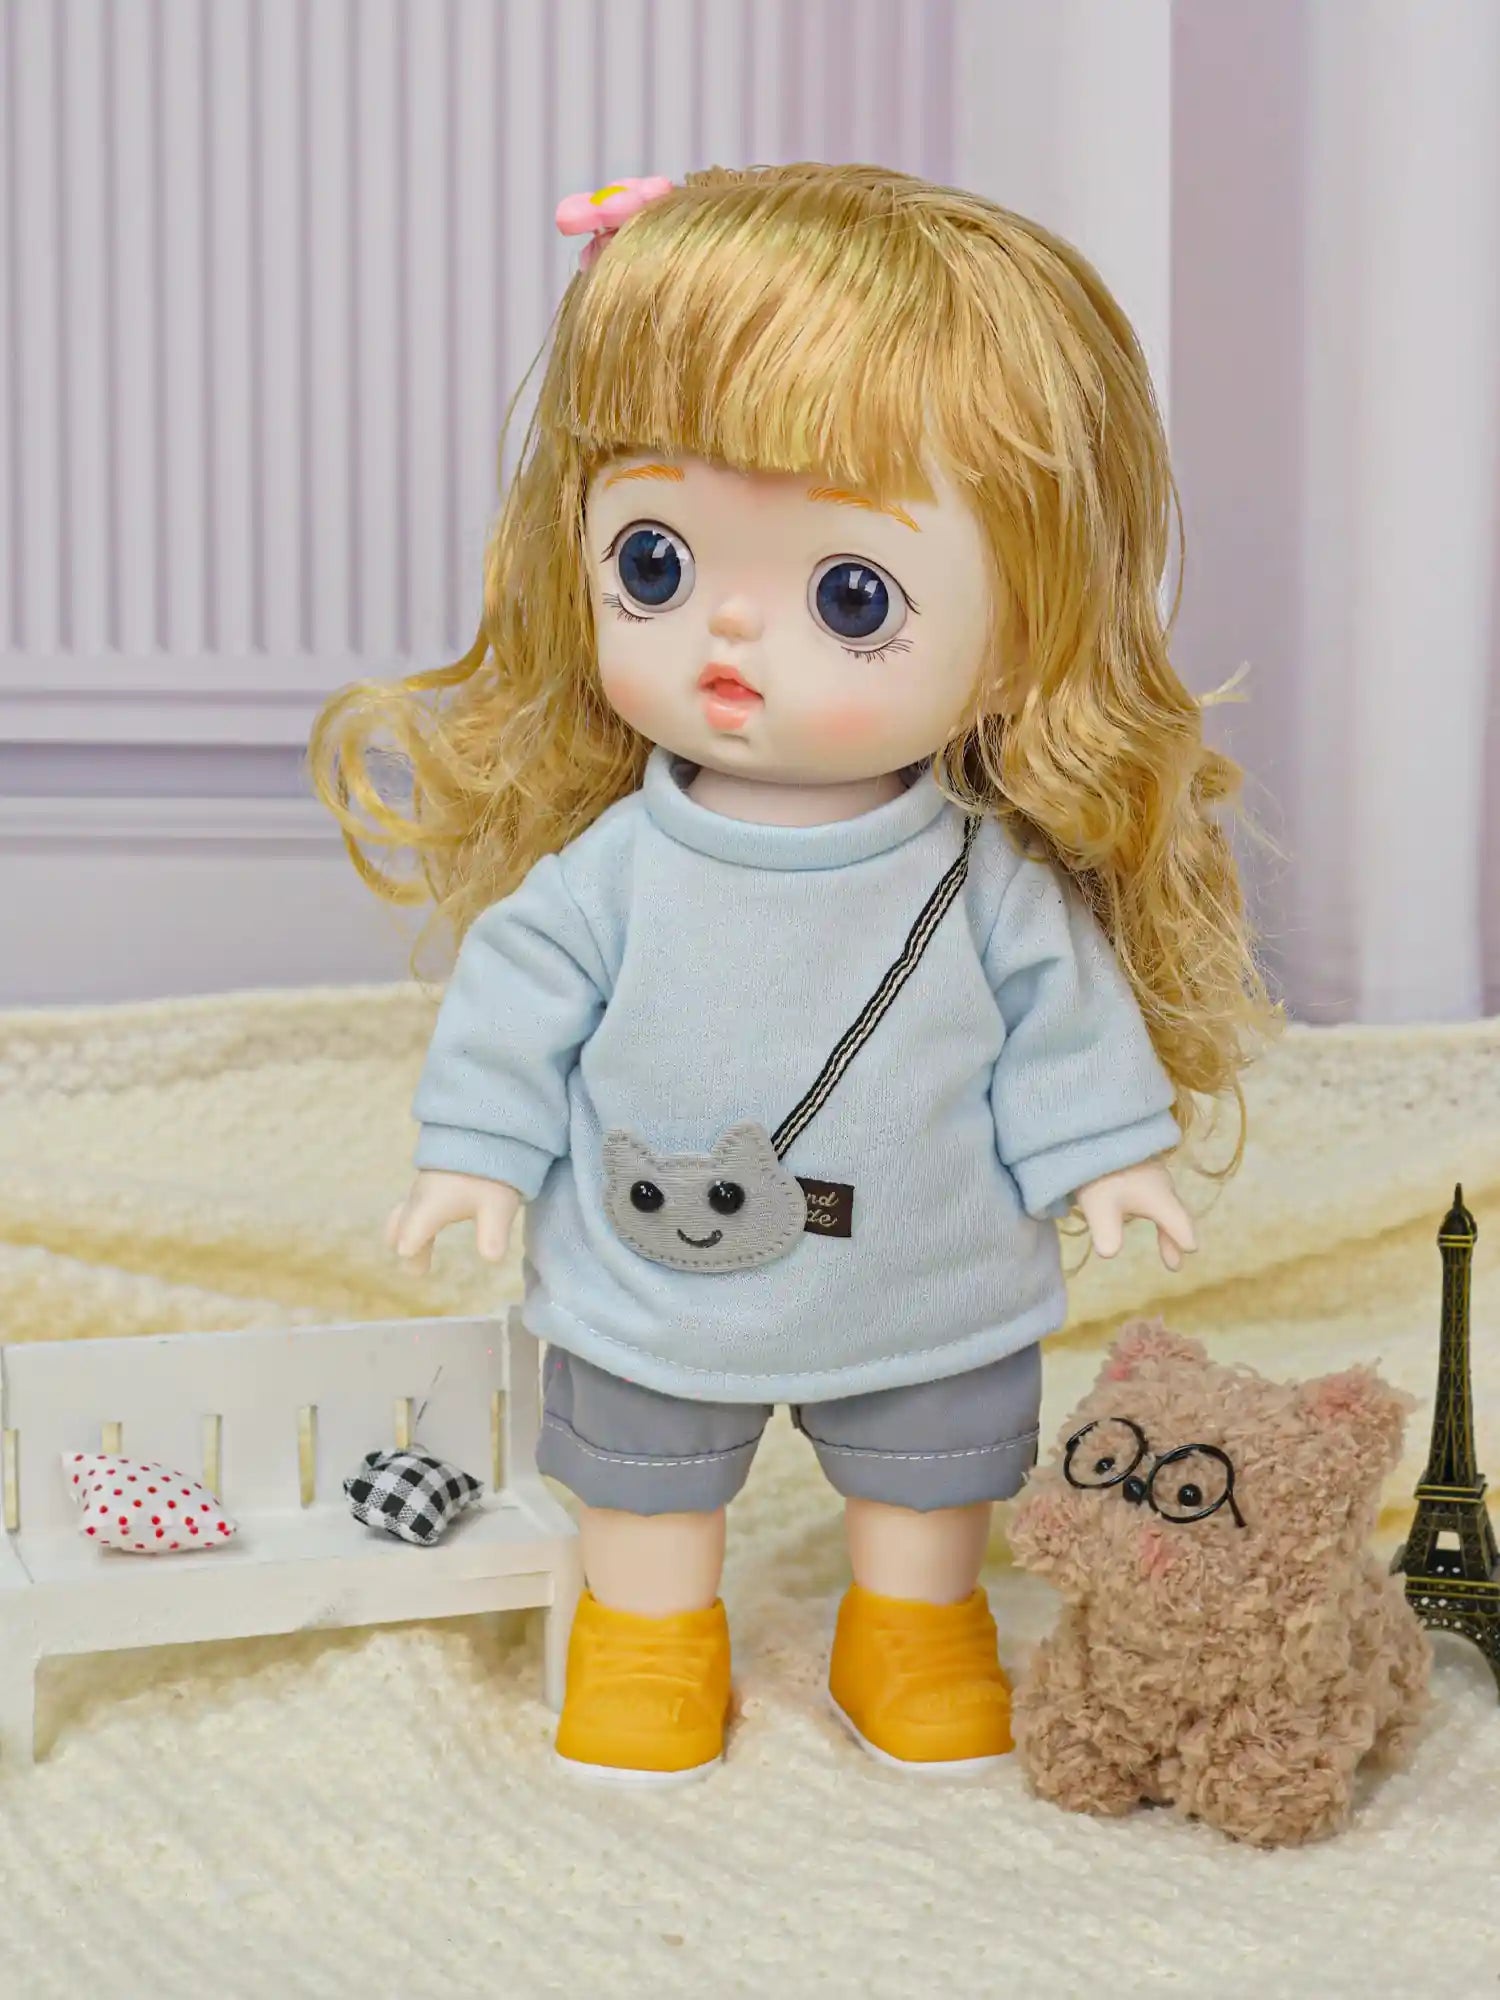 Kid's doll with a lifelike gaze and casual chic style, sharing a space with a furry friend and checkered cushions.